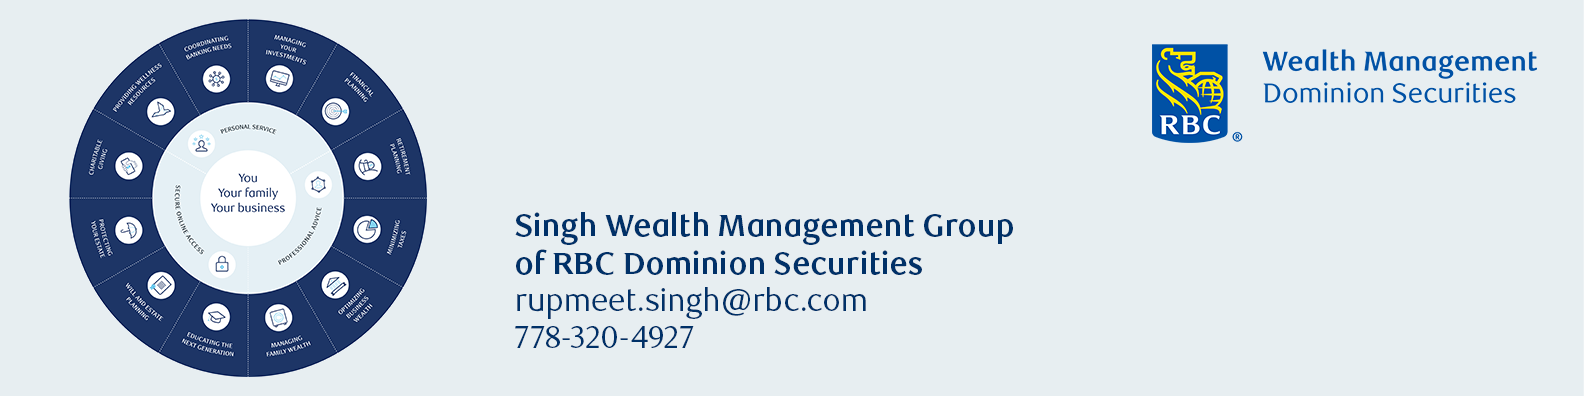 Singh Wealth Management Group of RBC Dominion Securities